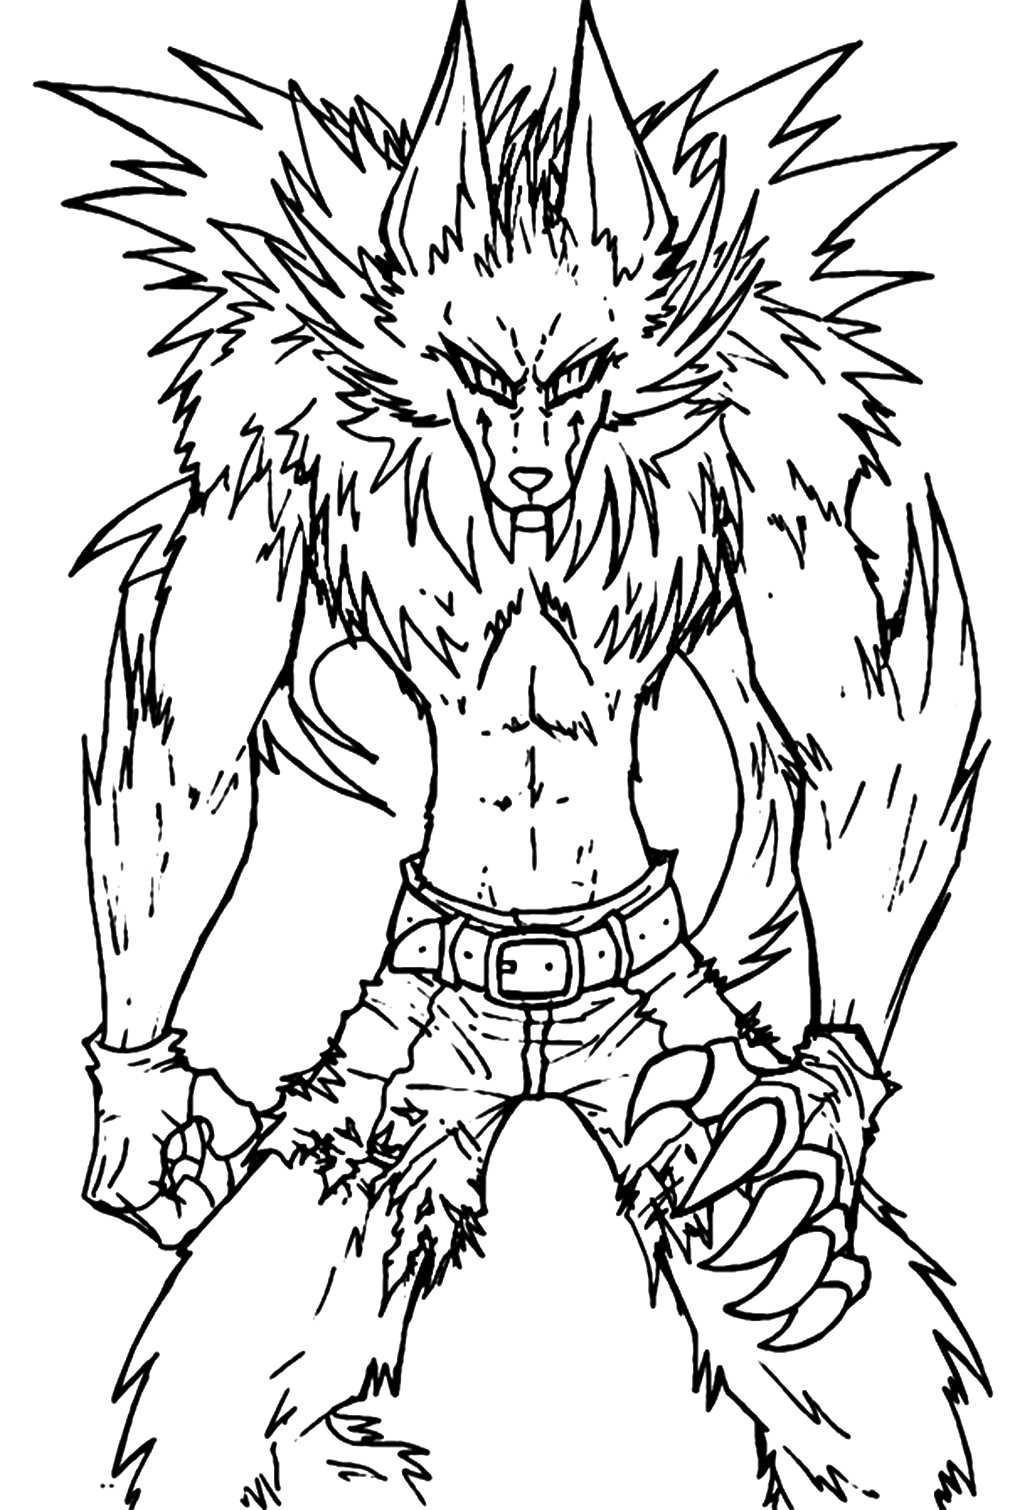 Werewolves Coloring Page For Adults Coloring Pages